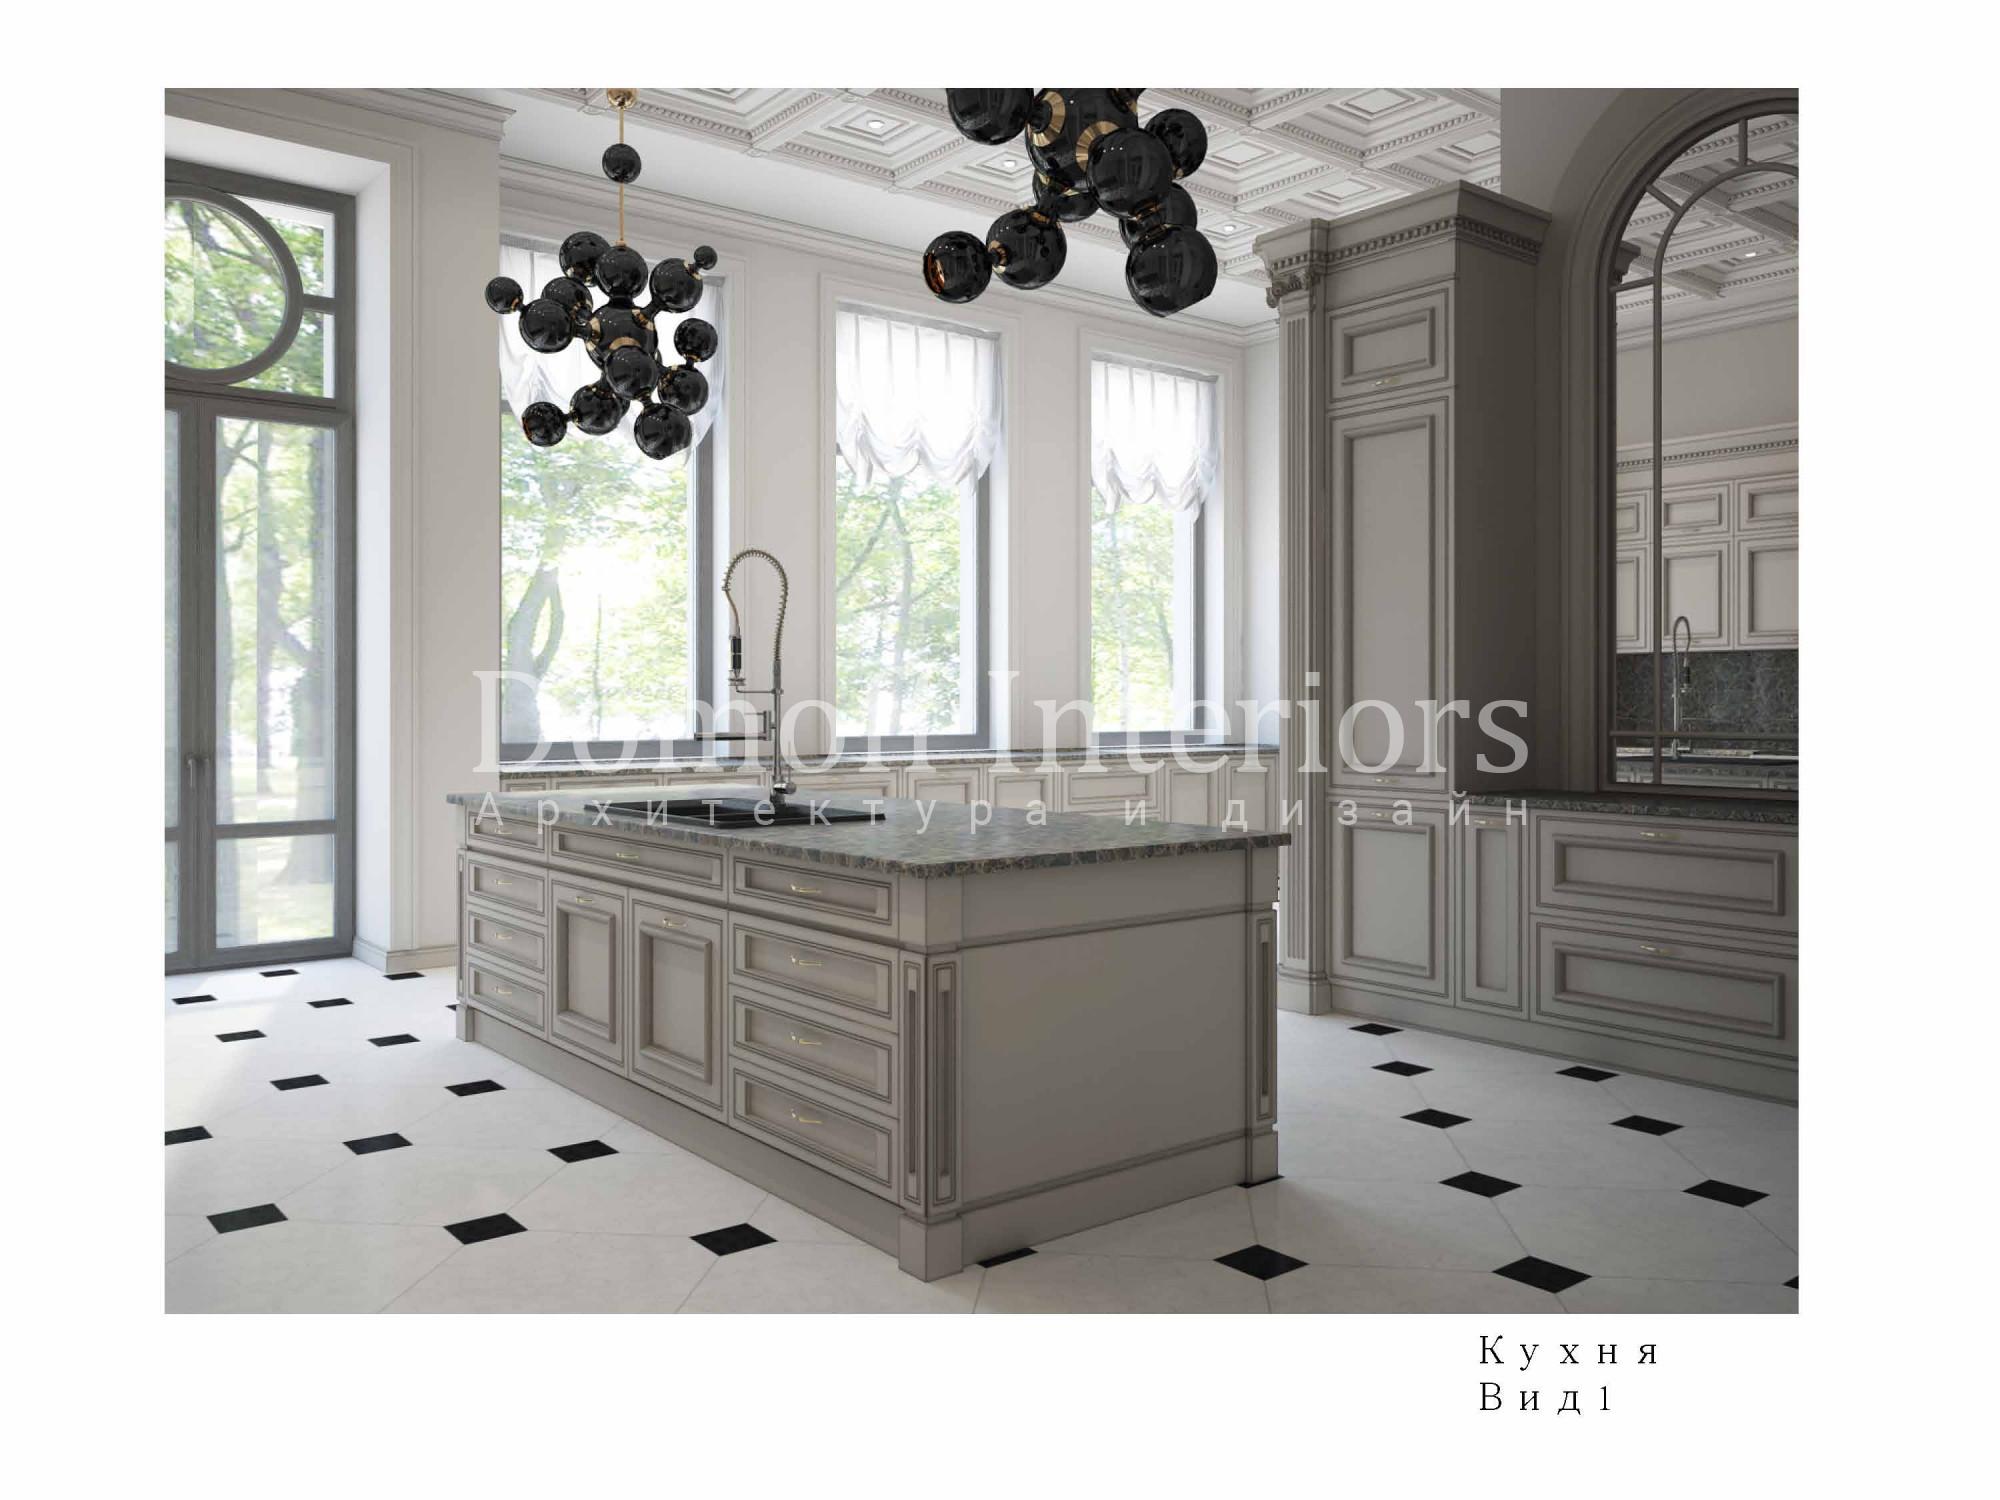 Kitchen made in the style of Contemporary classics Art deco